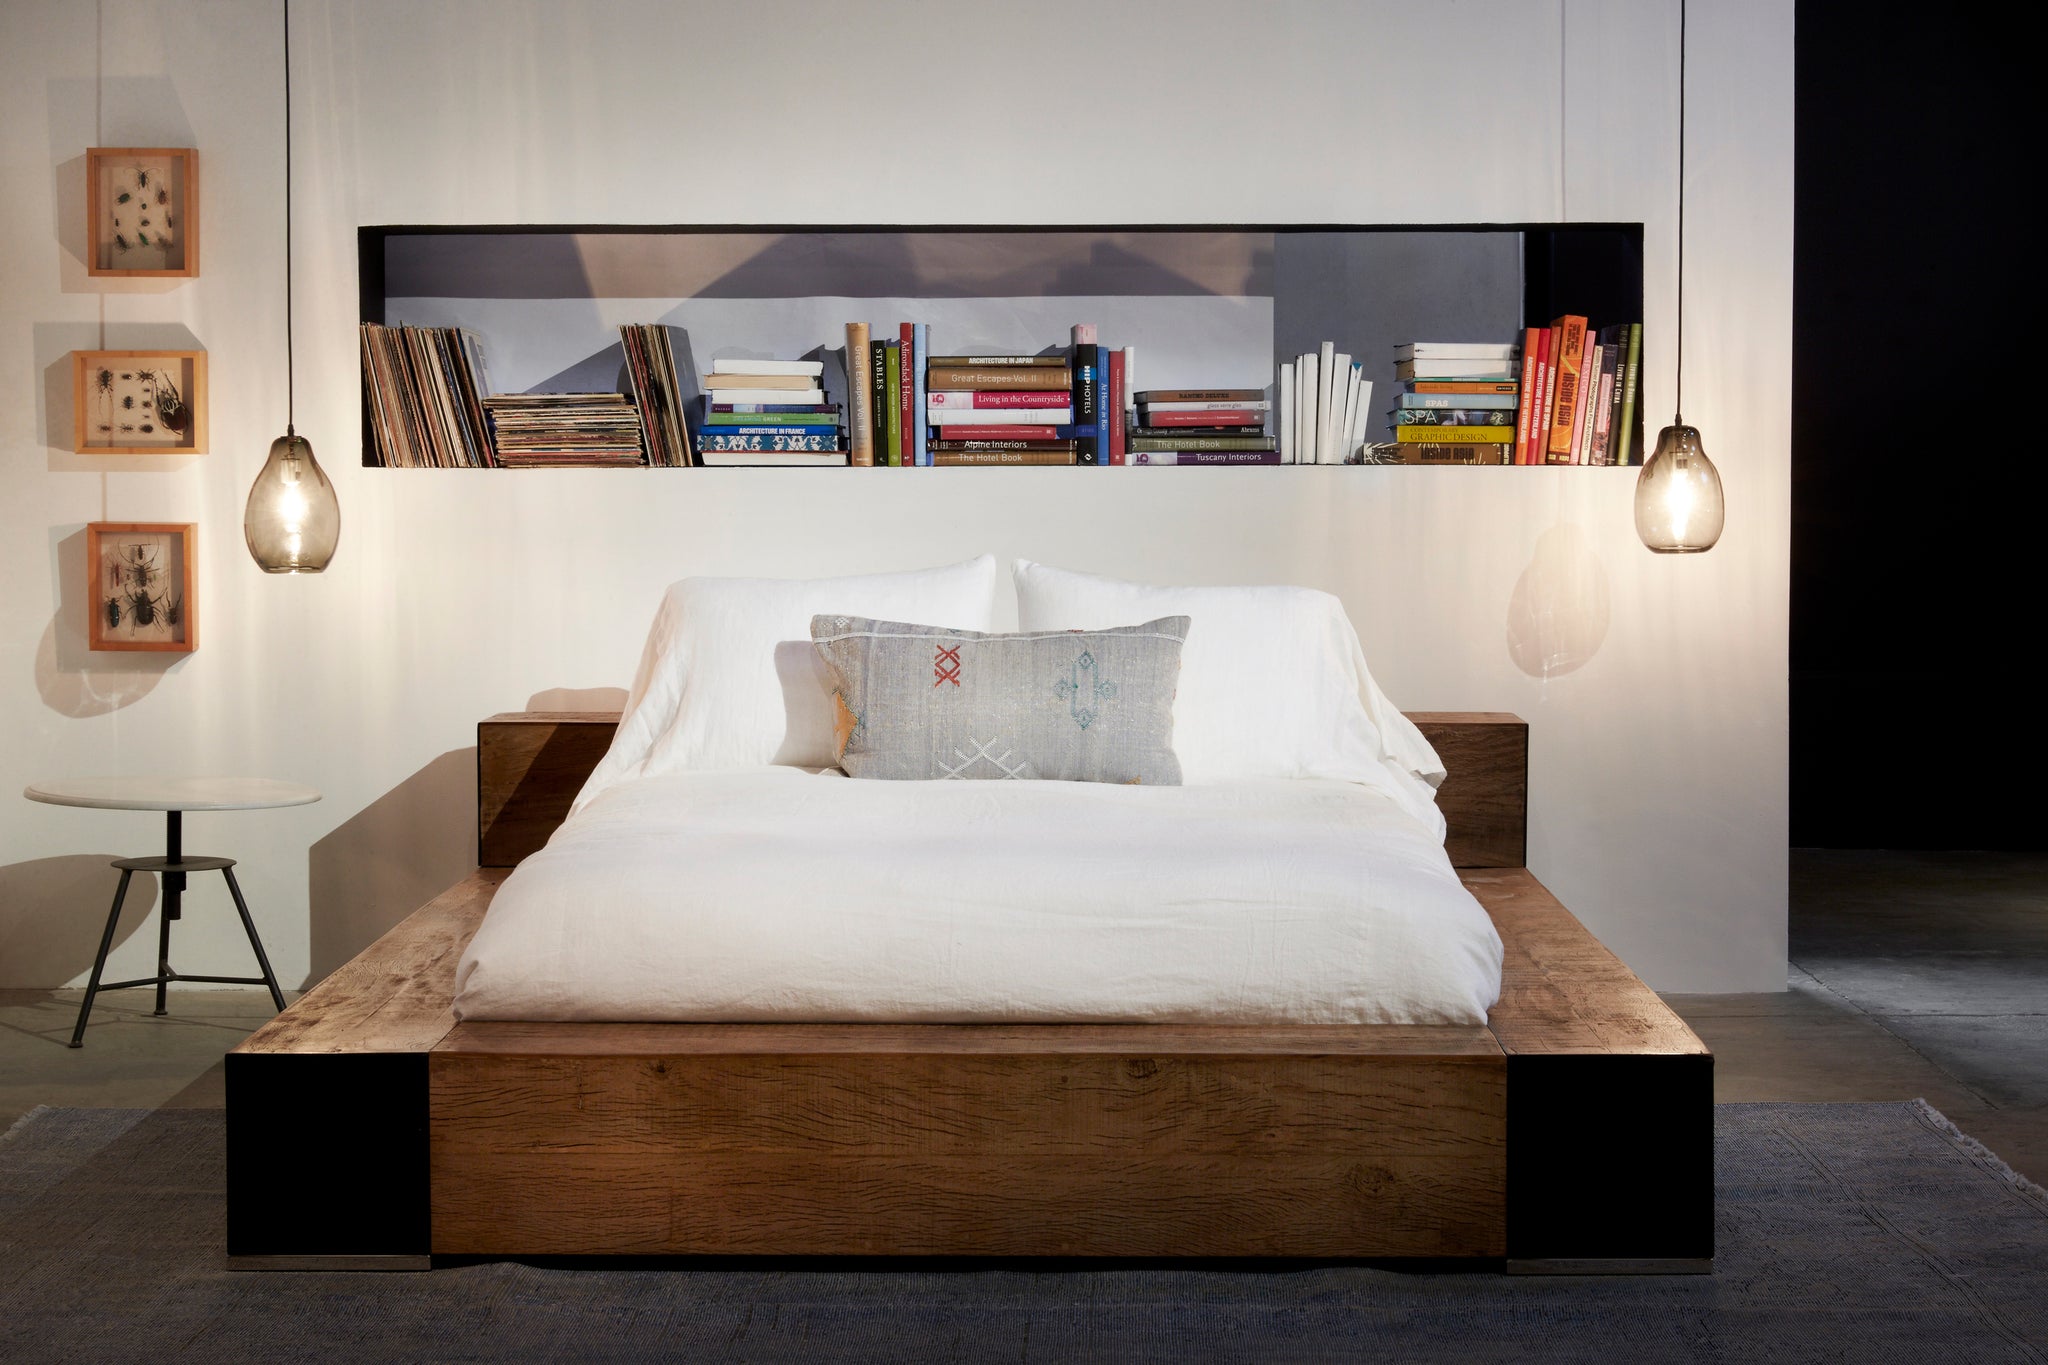  Bedroom setting. Wood platform bed with white bedding against white wall with book nook and smoke colored oval pendants hanging on either side of bed.  